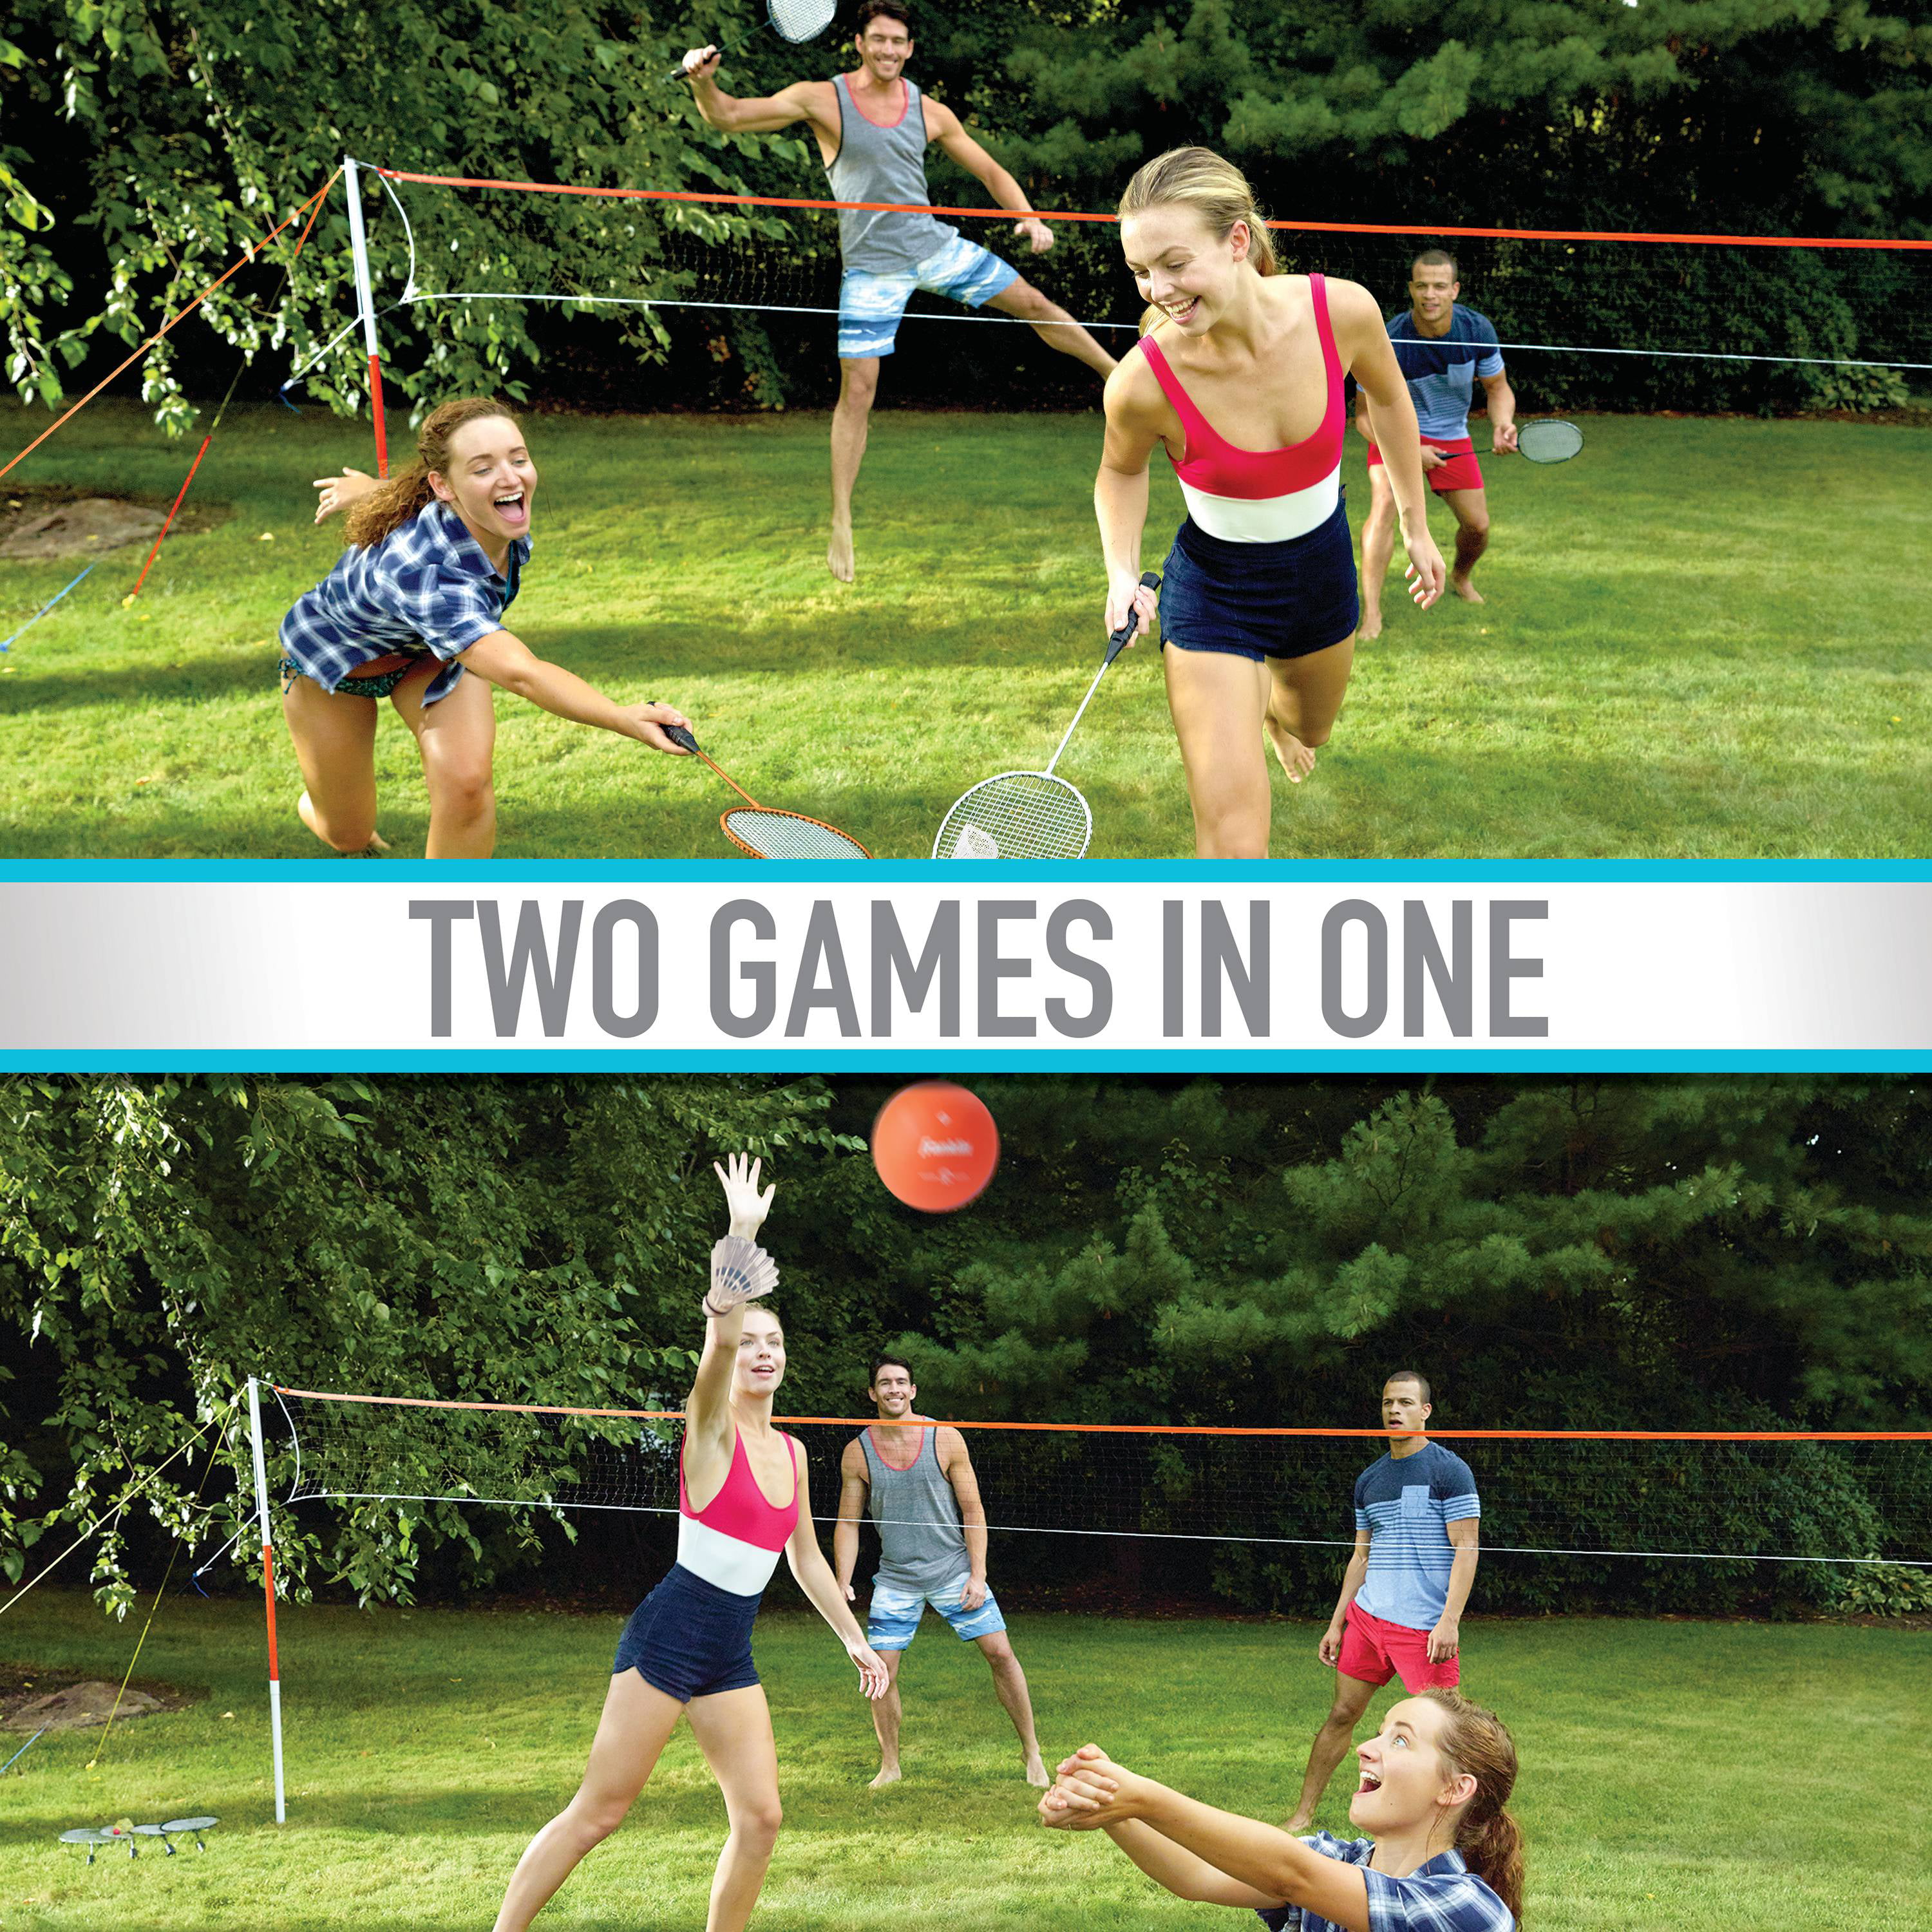  Franklin Sports Volleyball & Badminton Combo Set - Portable  Backyard Volleyball & Badminton Net Set - Volleyball, Rackets & Birdie  Included - Pro : Sports & Outdoors